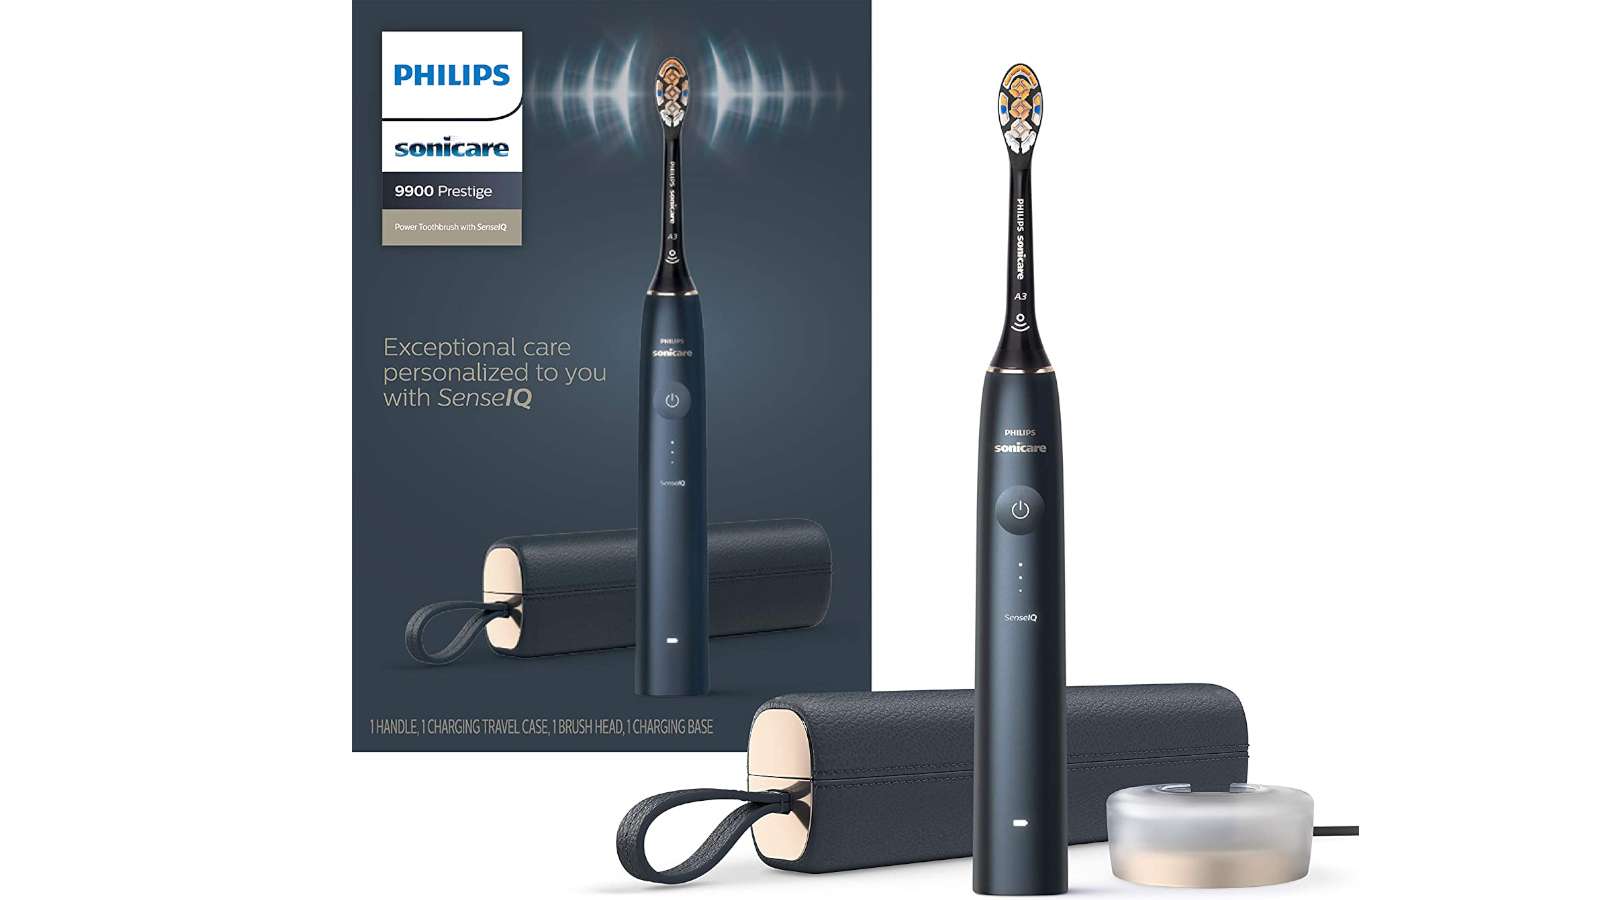 Philips Sonicare 9900 Prestige (Midnight, HX9990/12) toothbrush and its packaging